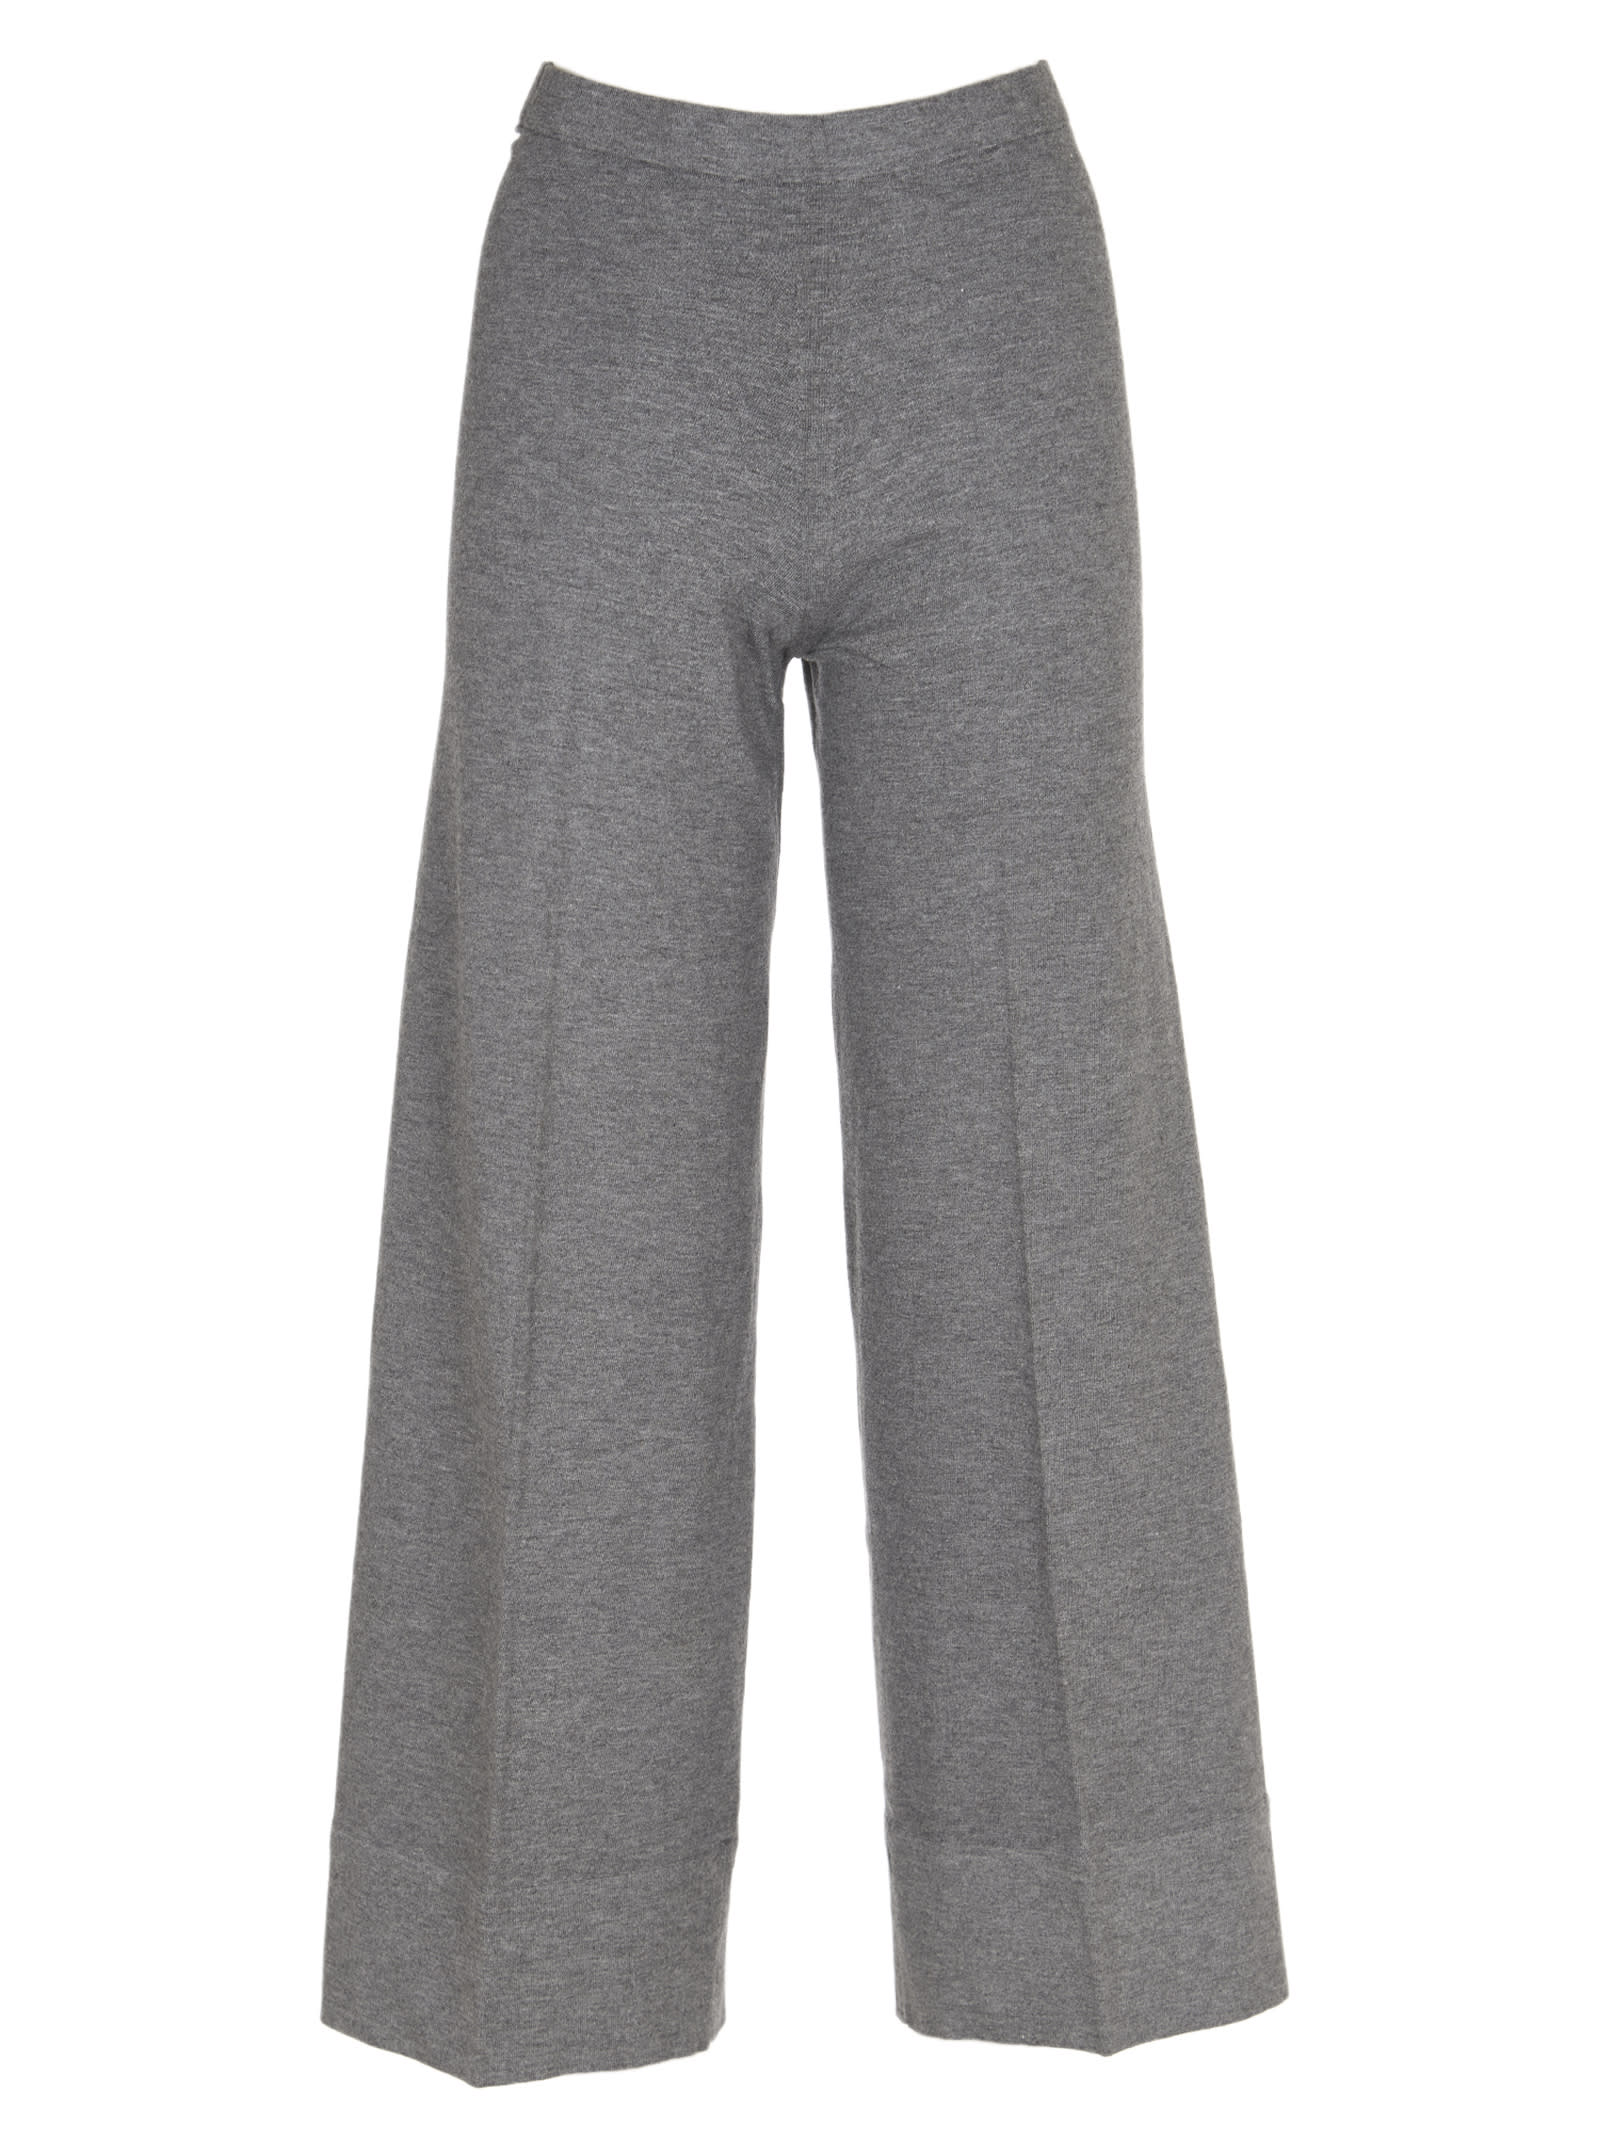 SEMICOUTURE Grey Palazzo Trousers